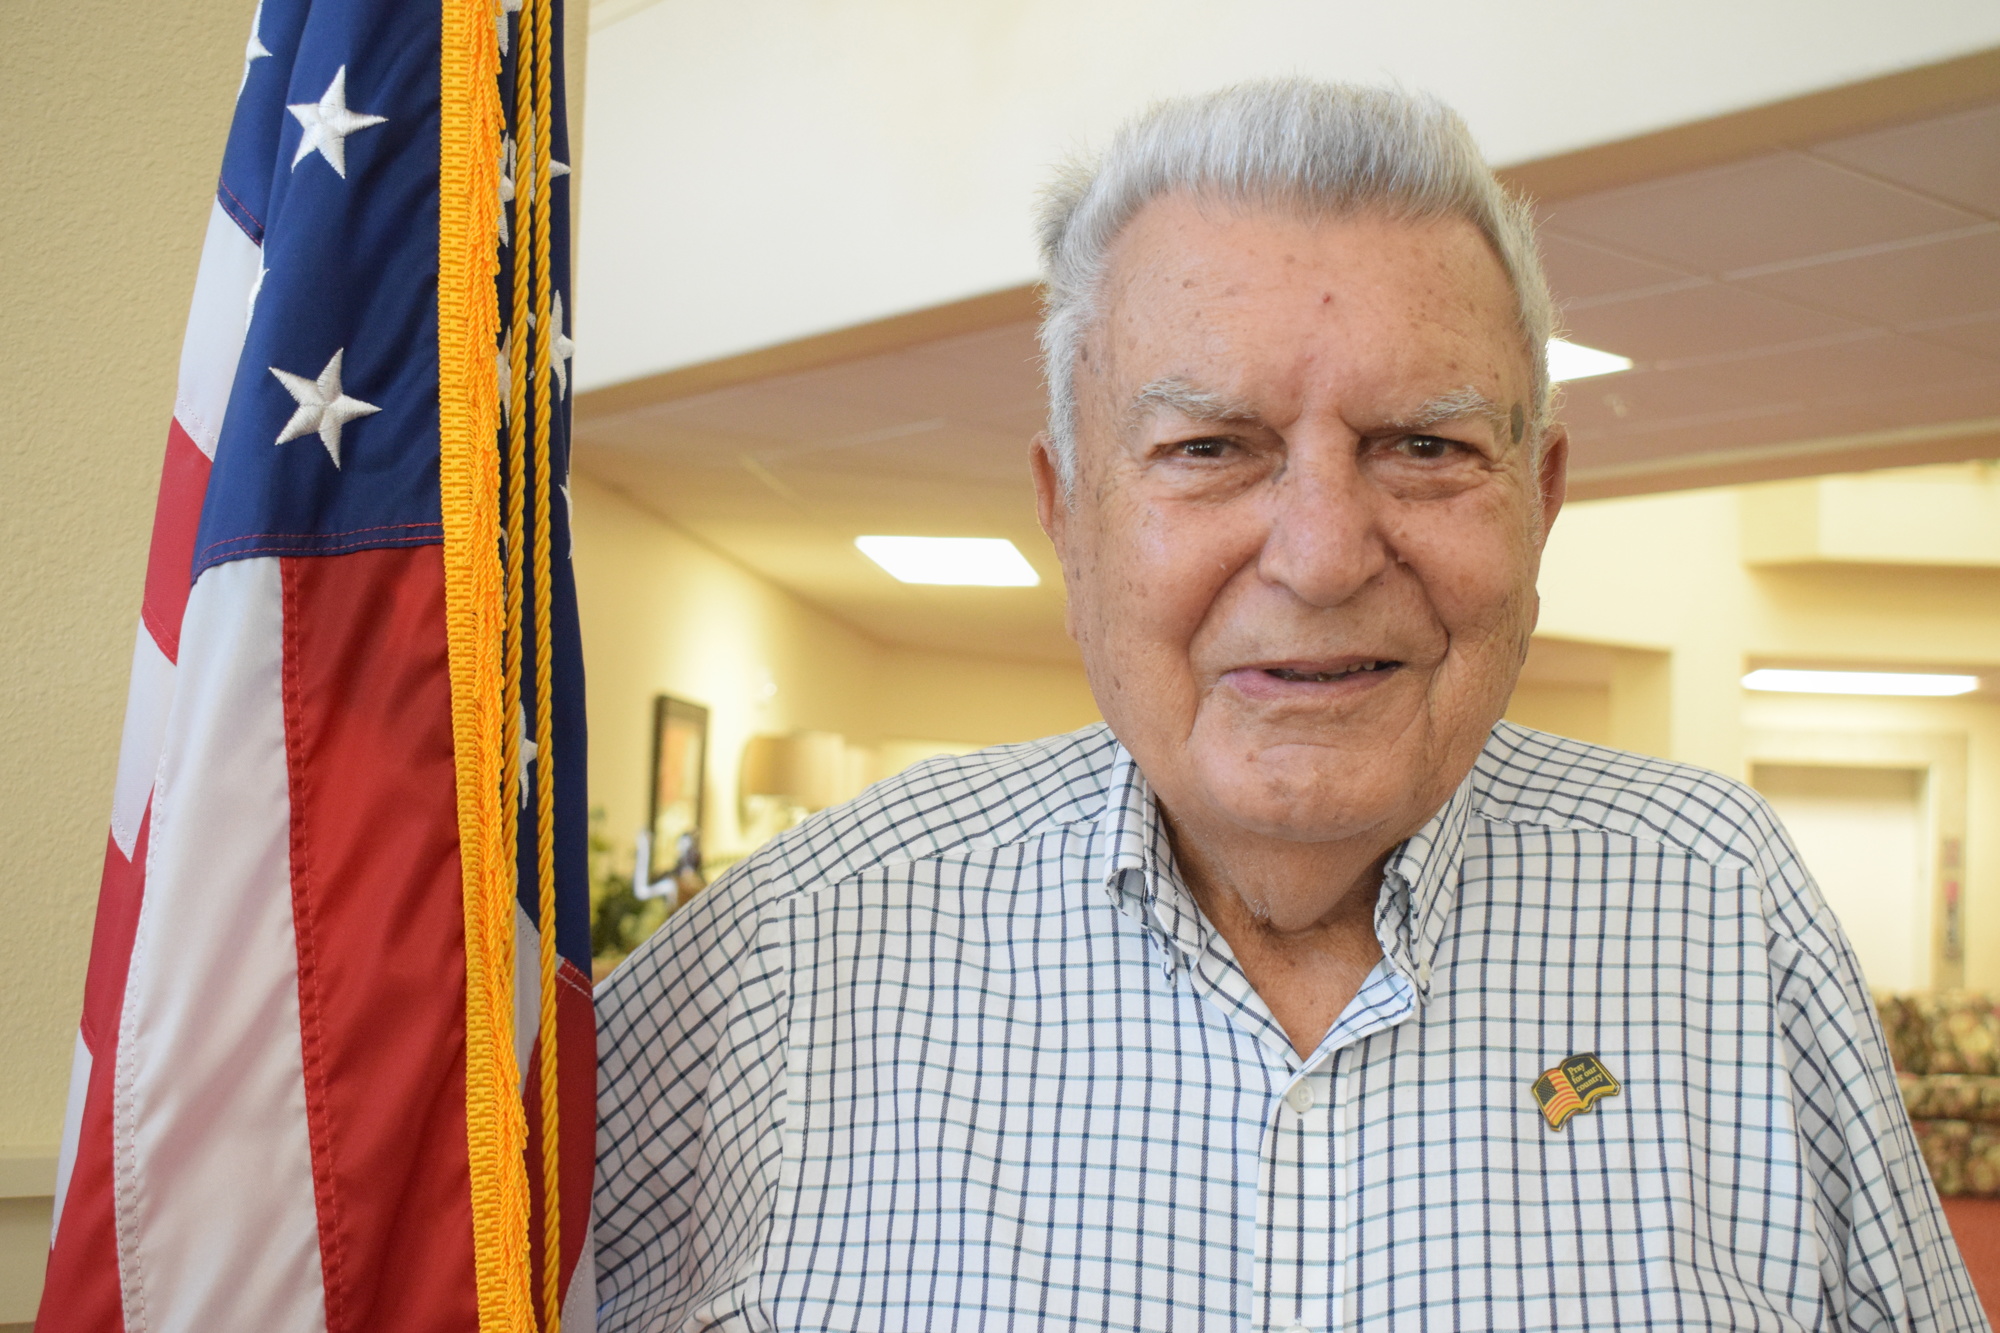 Leo Hyatt always has been dedicated to his country and served in the Navy from 1957 to 1986. He was a fighter pilot during the Vietnam War and later commanded his own squadron.